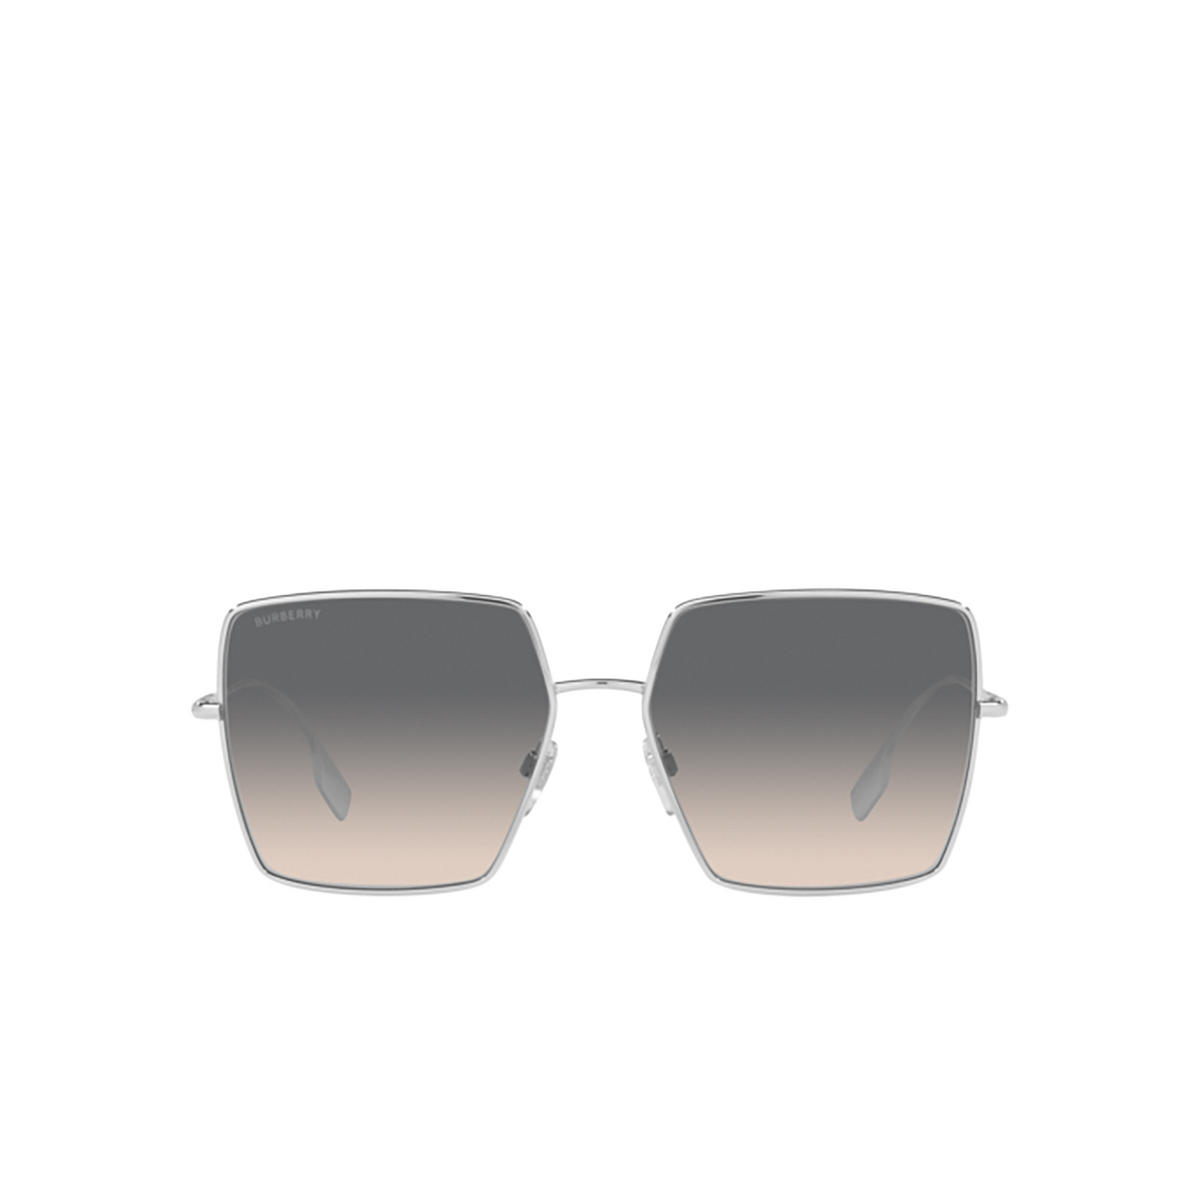 Burberry DAPHNE Sunglasses 1005G9 Silver - front view